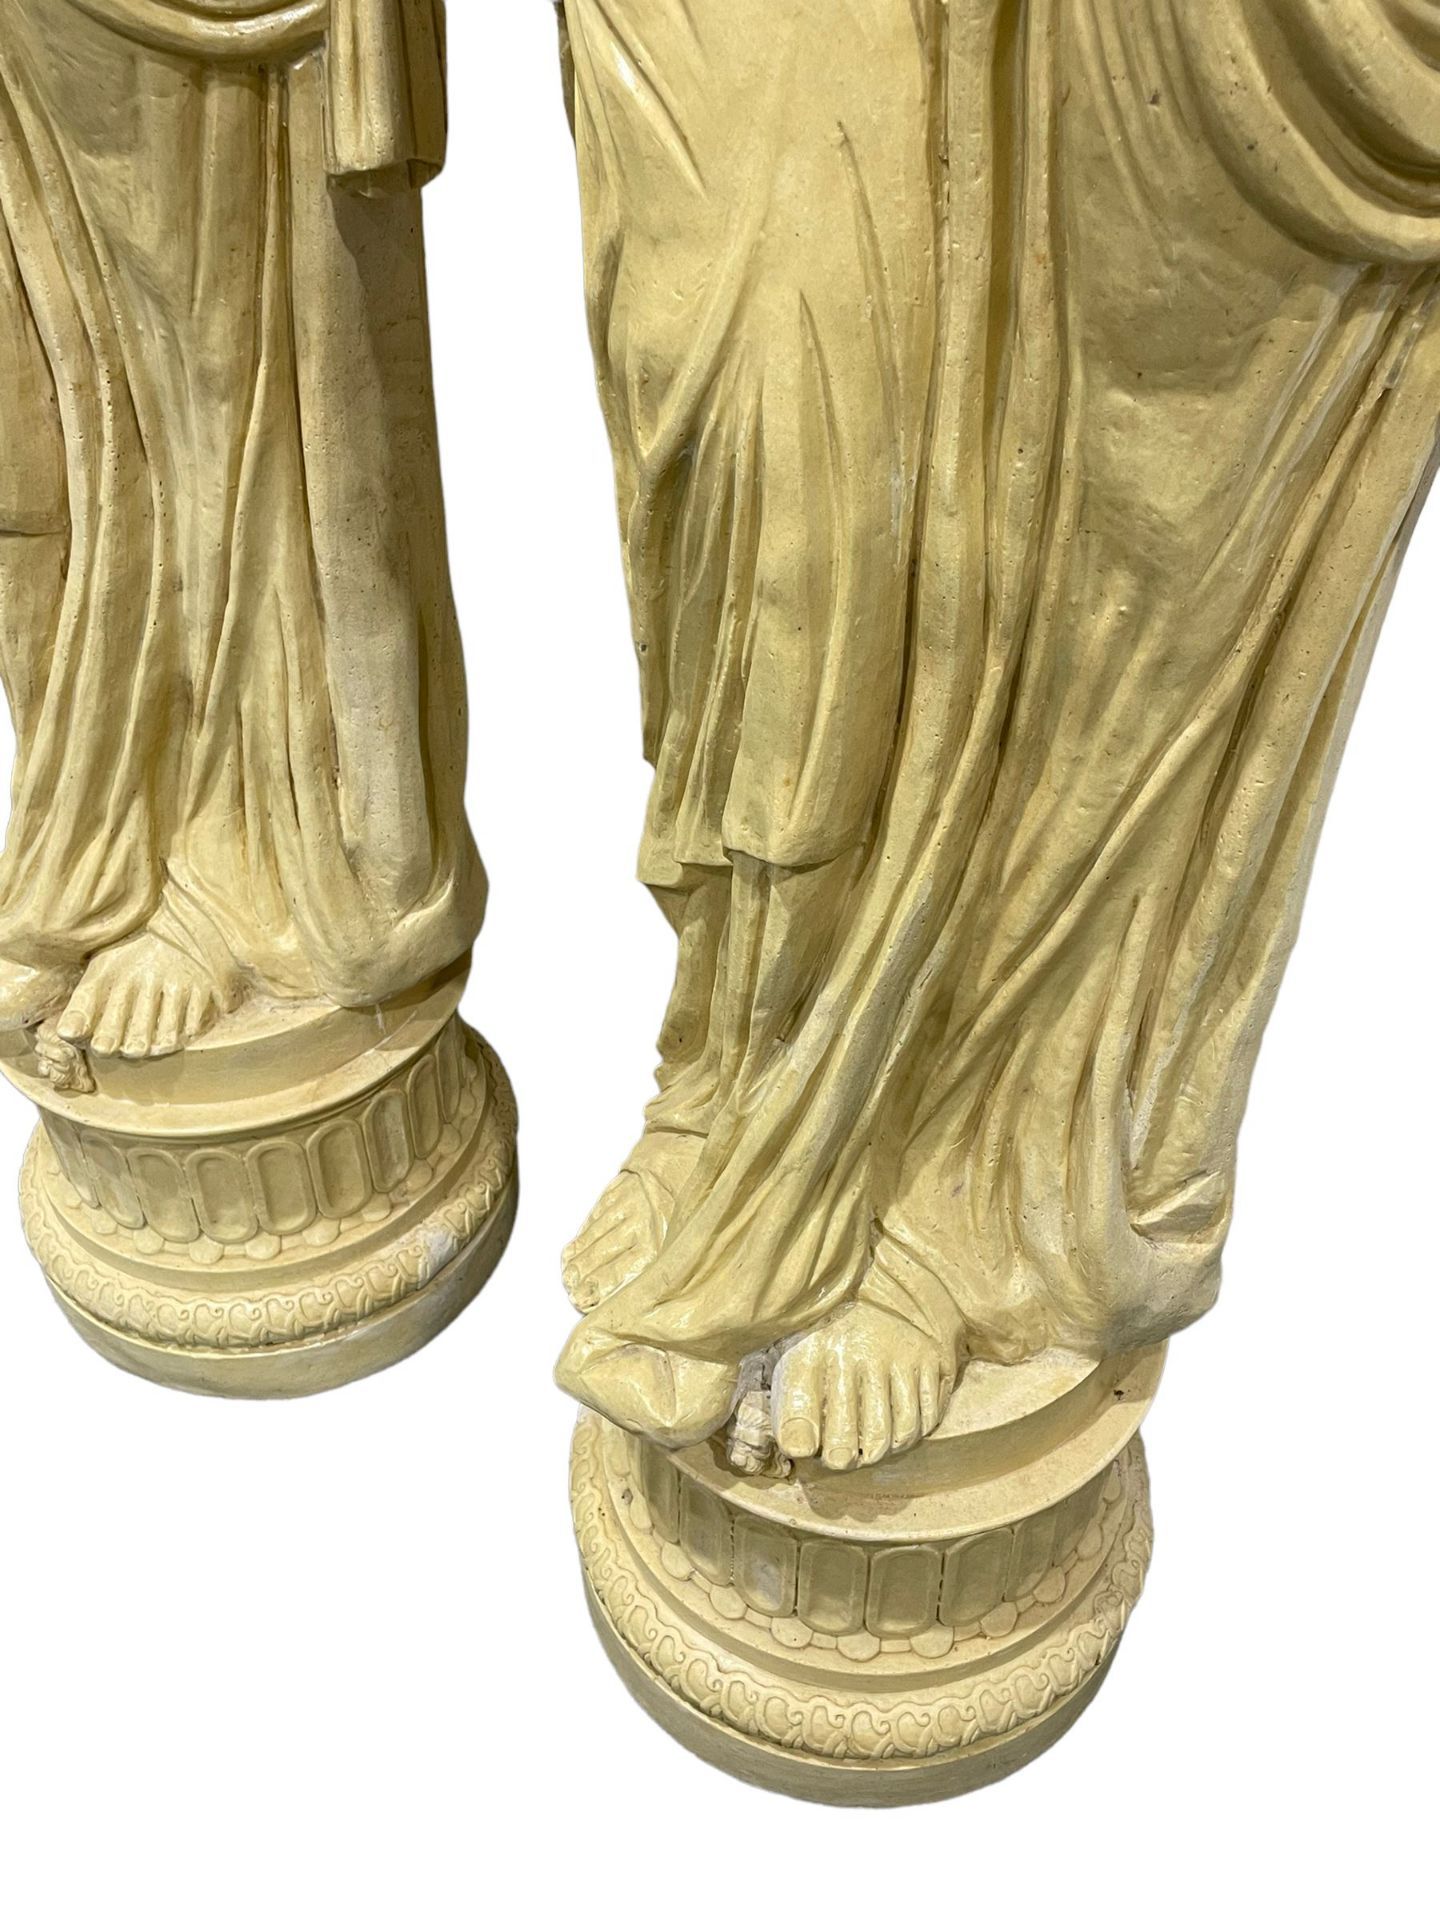 A Pair Of Greek Style Caryatid Columns, Square Top With Gadroon Underbelly, The Semi-Nude Female - Image 6 of 8